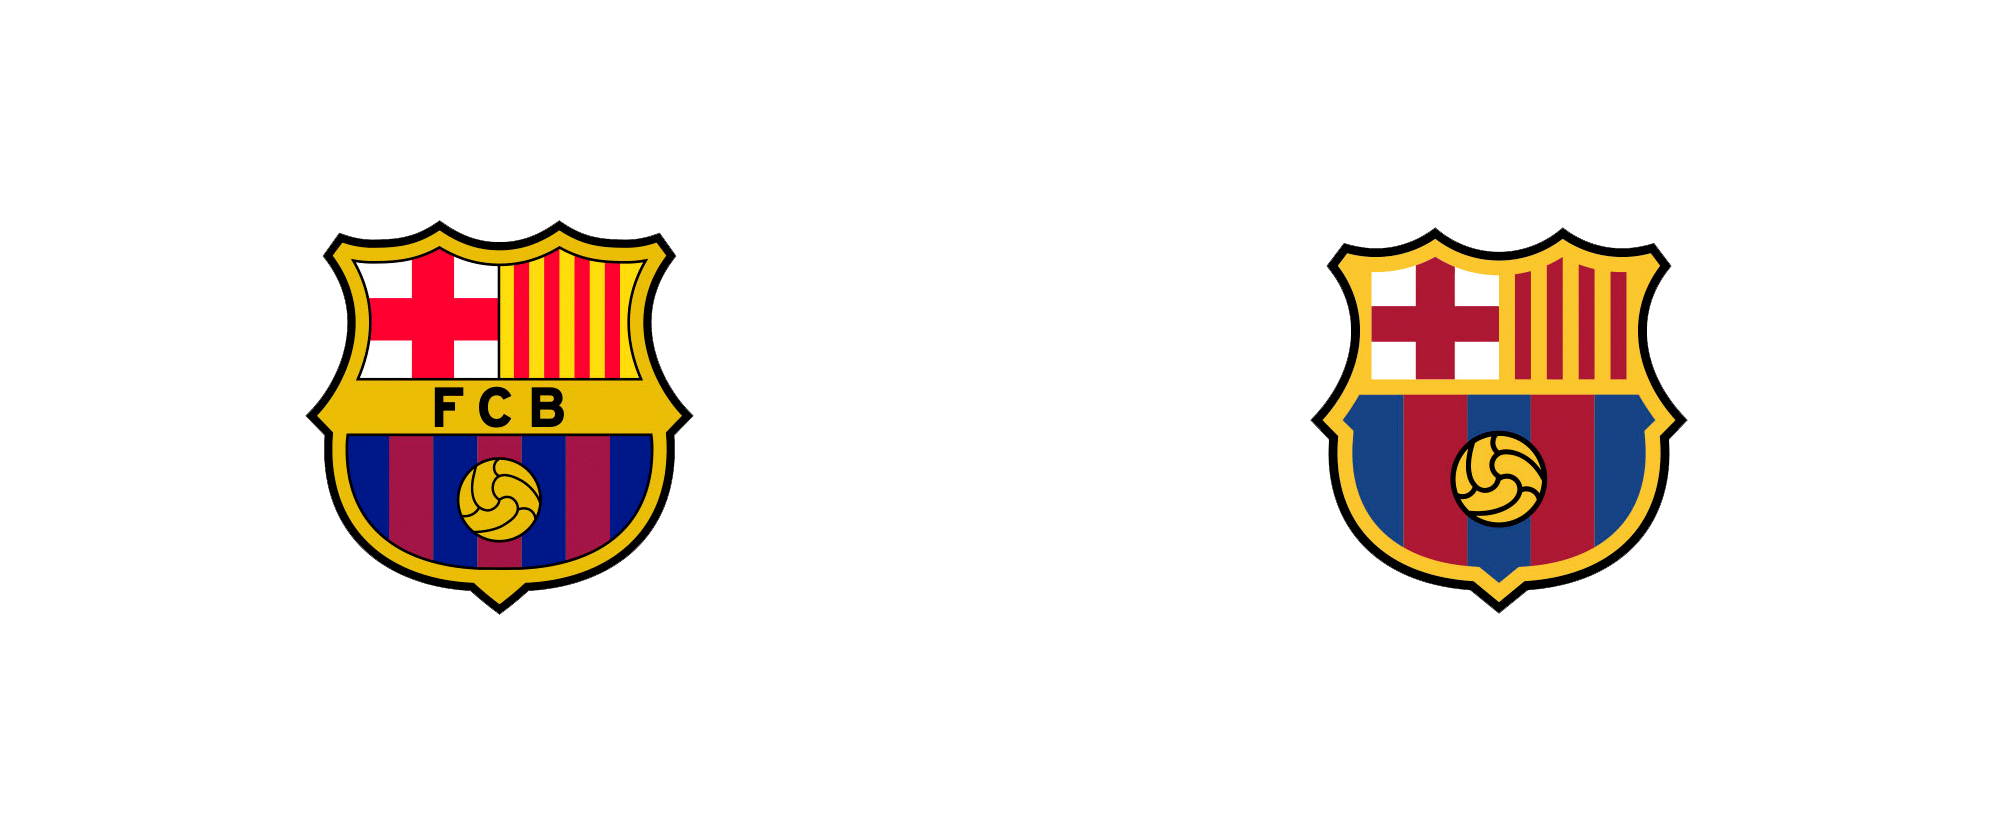 Brand New New Crest And Identity For Fc Barcelona By Summa